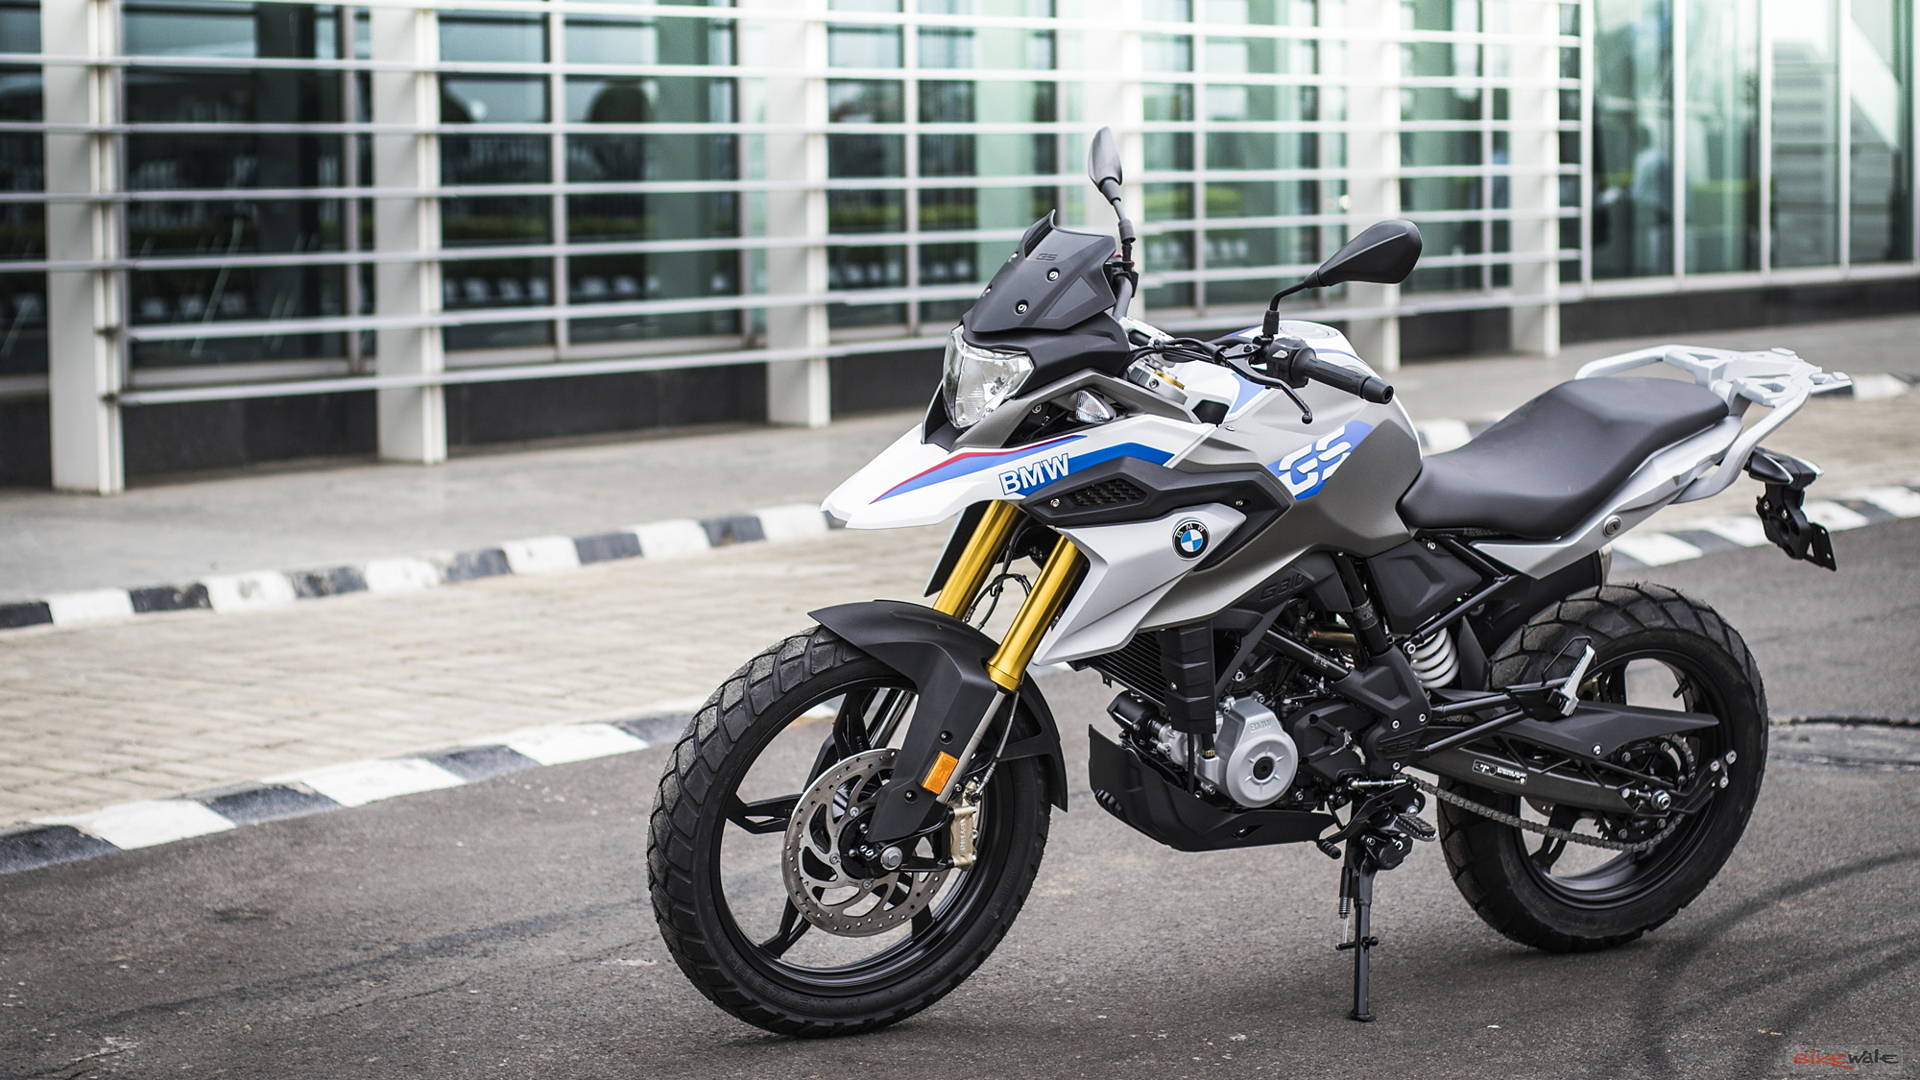 Bmw G310gs 18 19 Cosmic Black Colour G310gs 18 19 Colours In India Bikewale